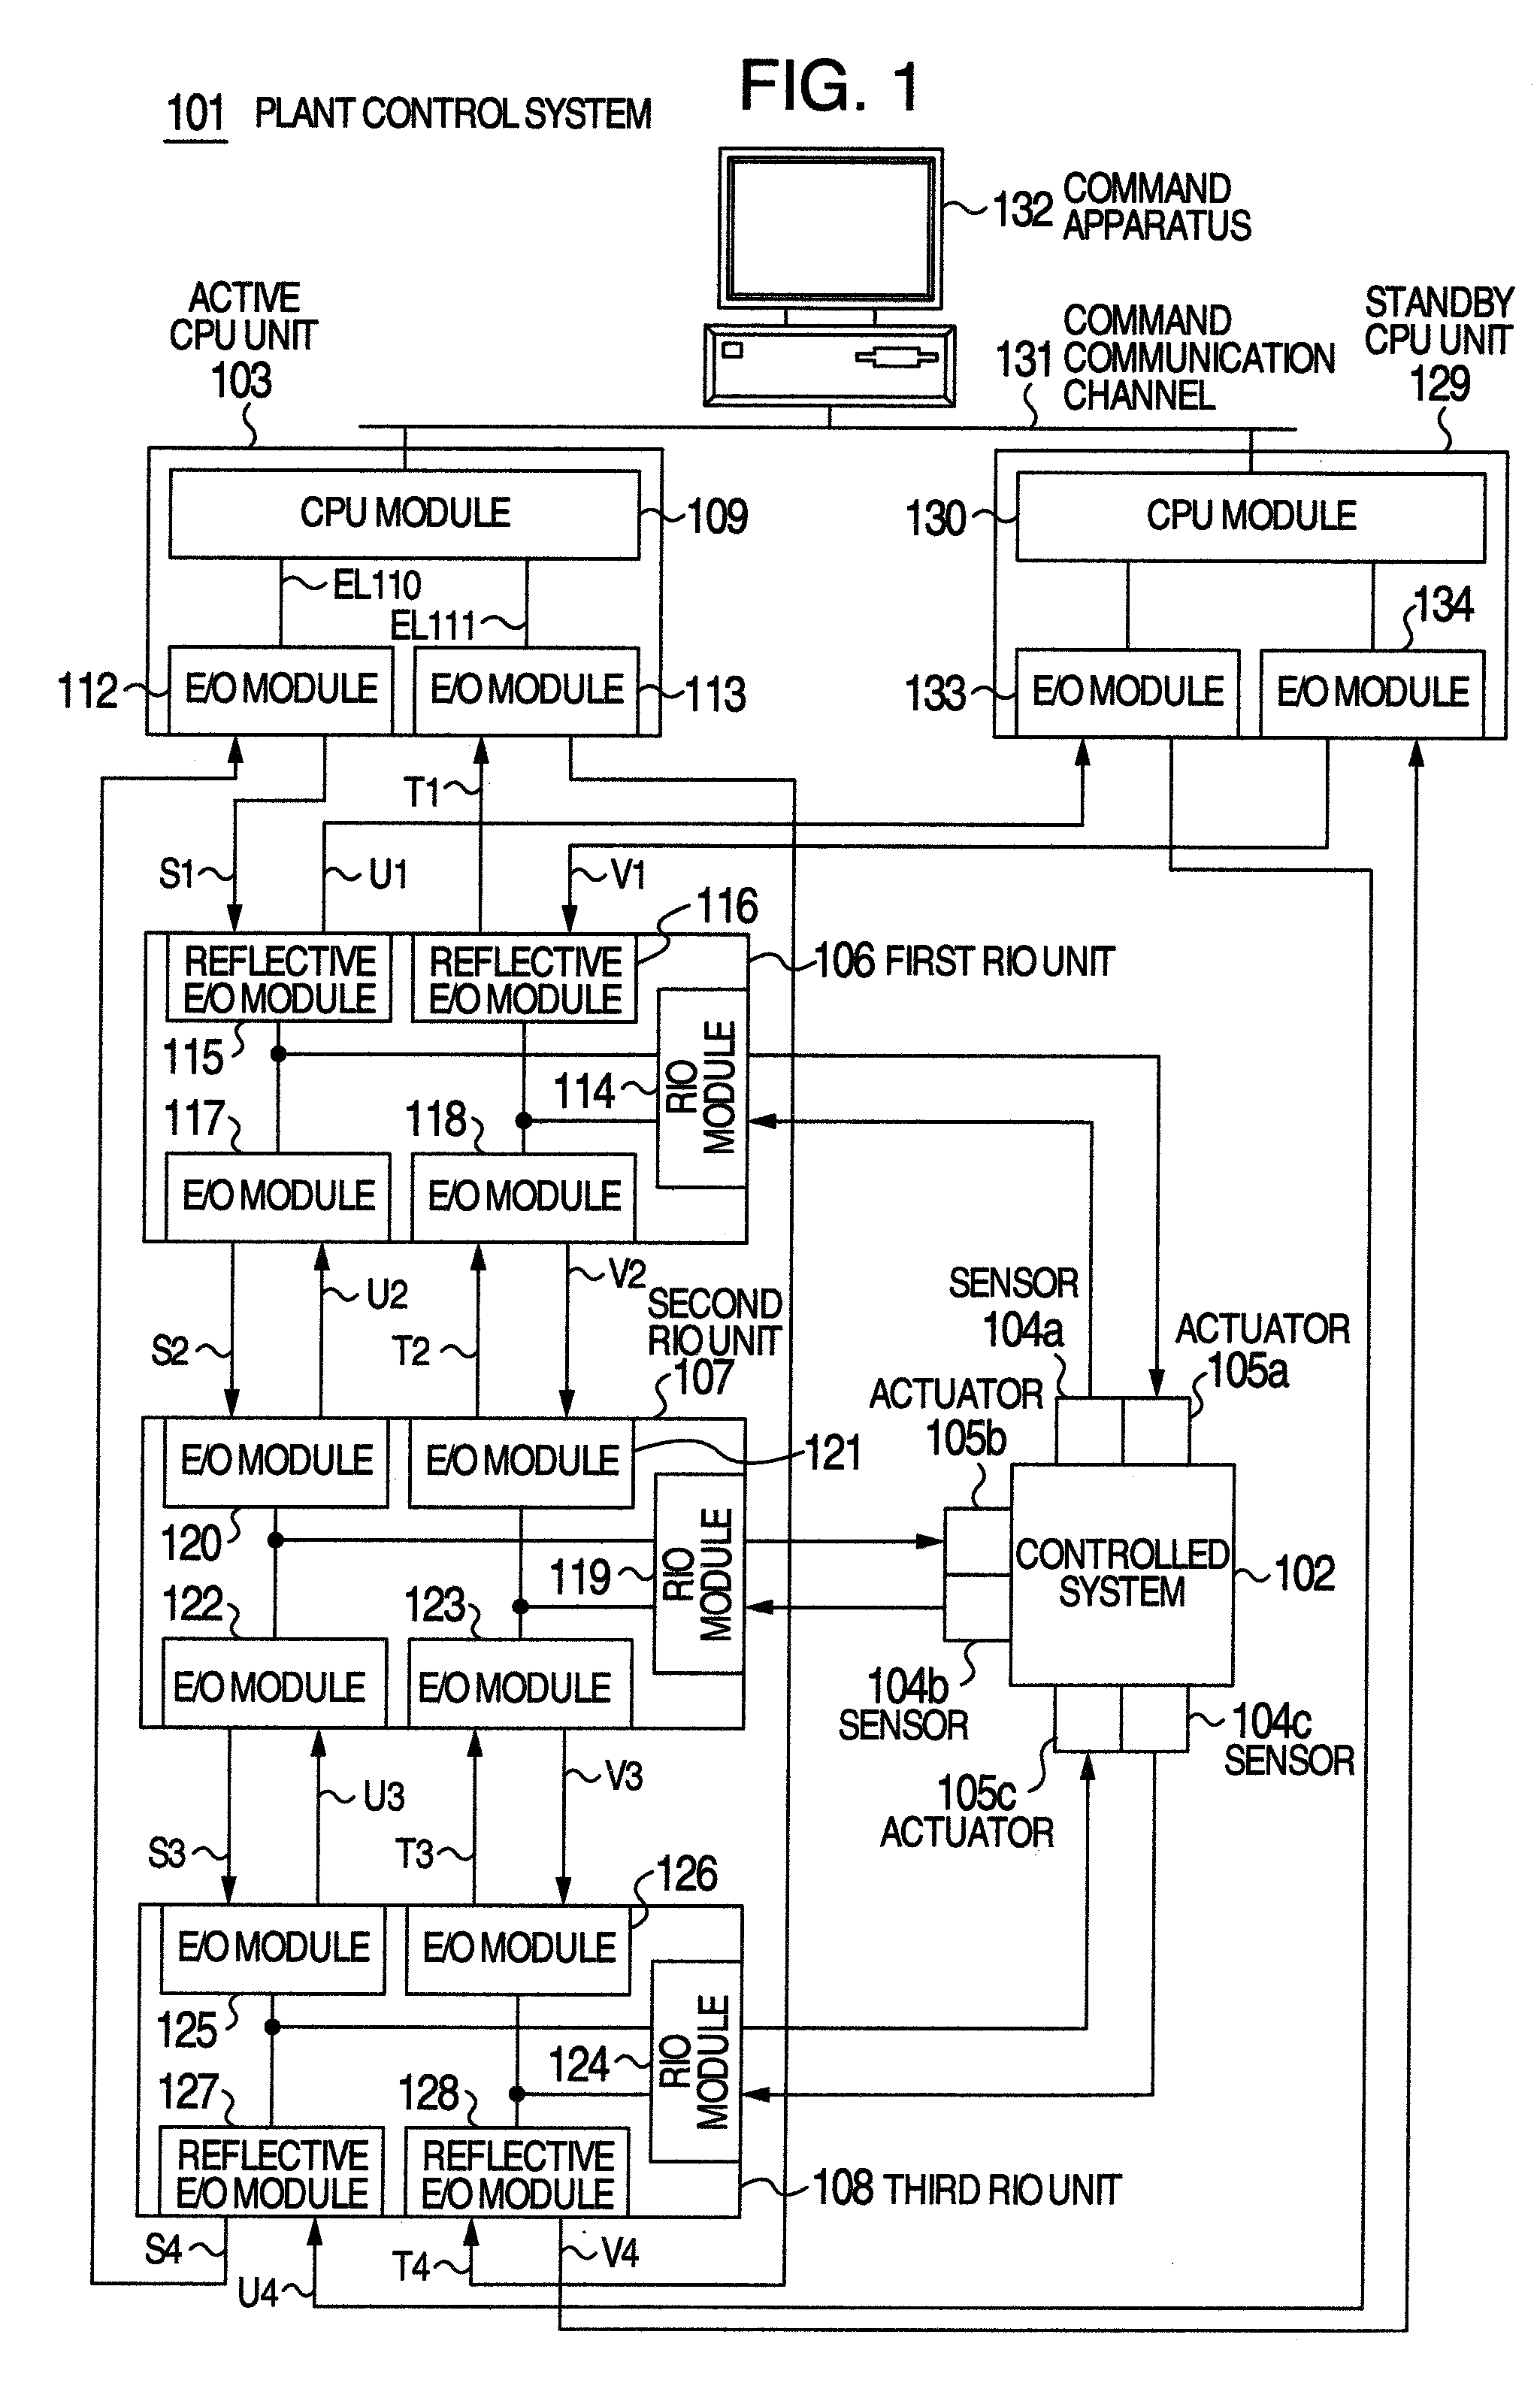 Control system and CPU unit